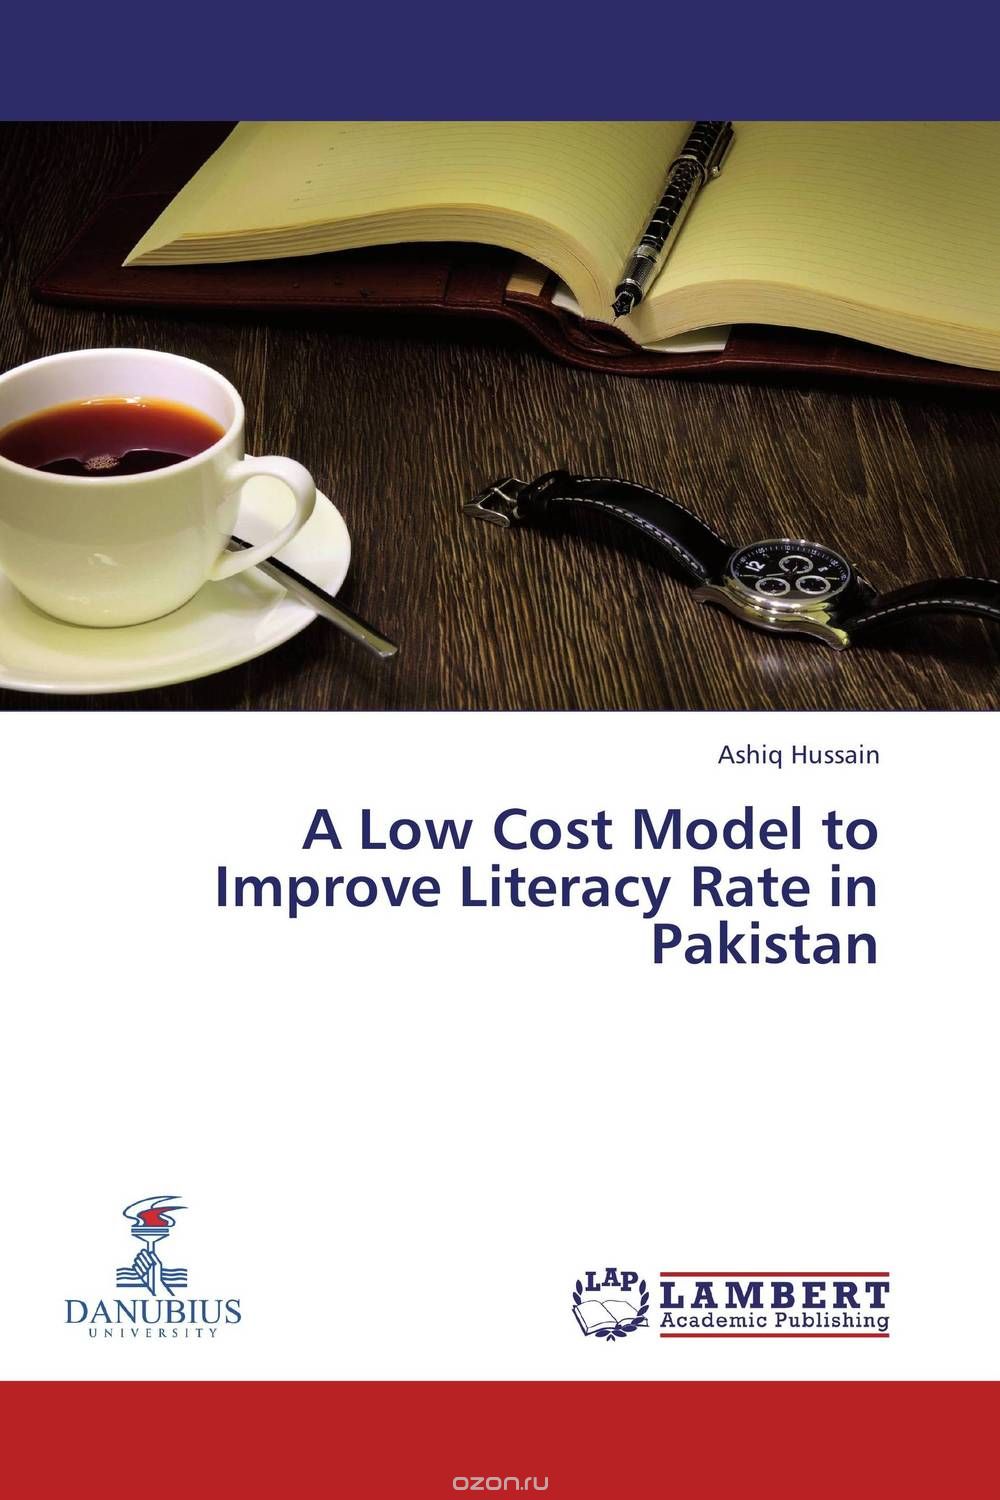 A Low Cost Model to Improve Literacy Rate in Pakistan